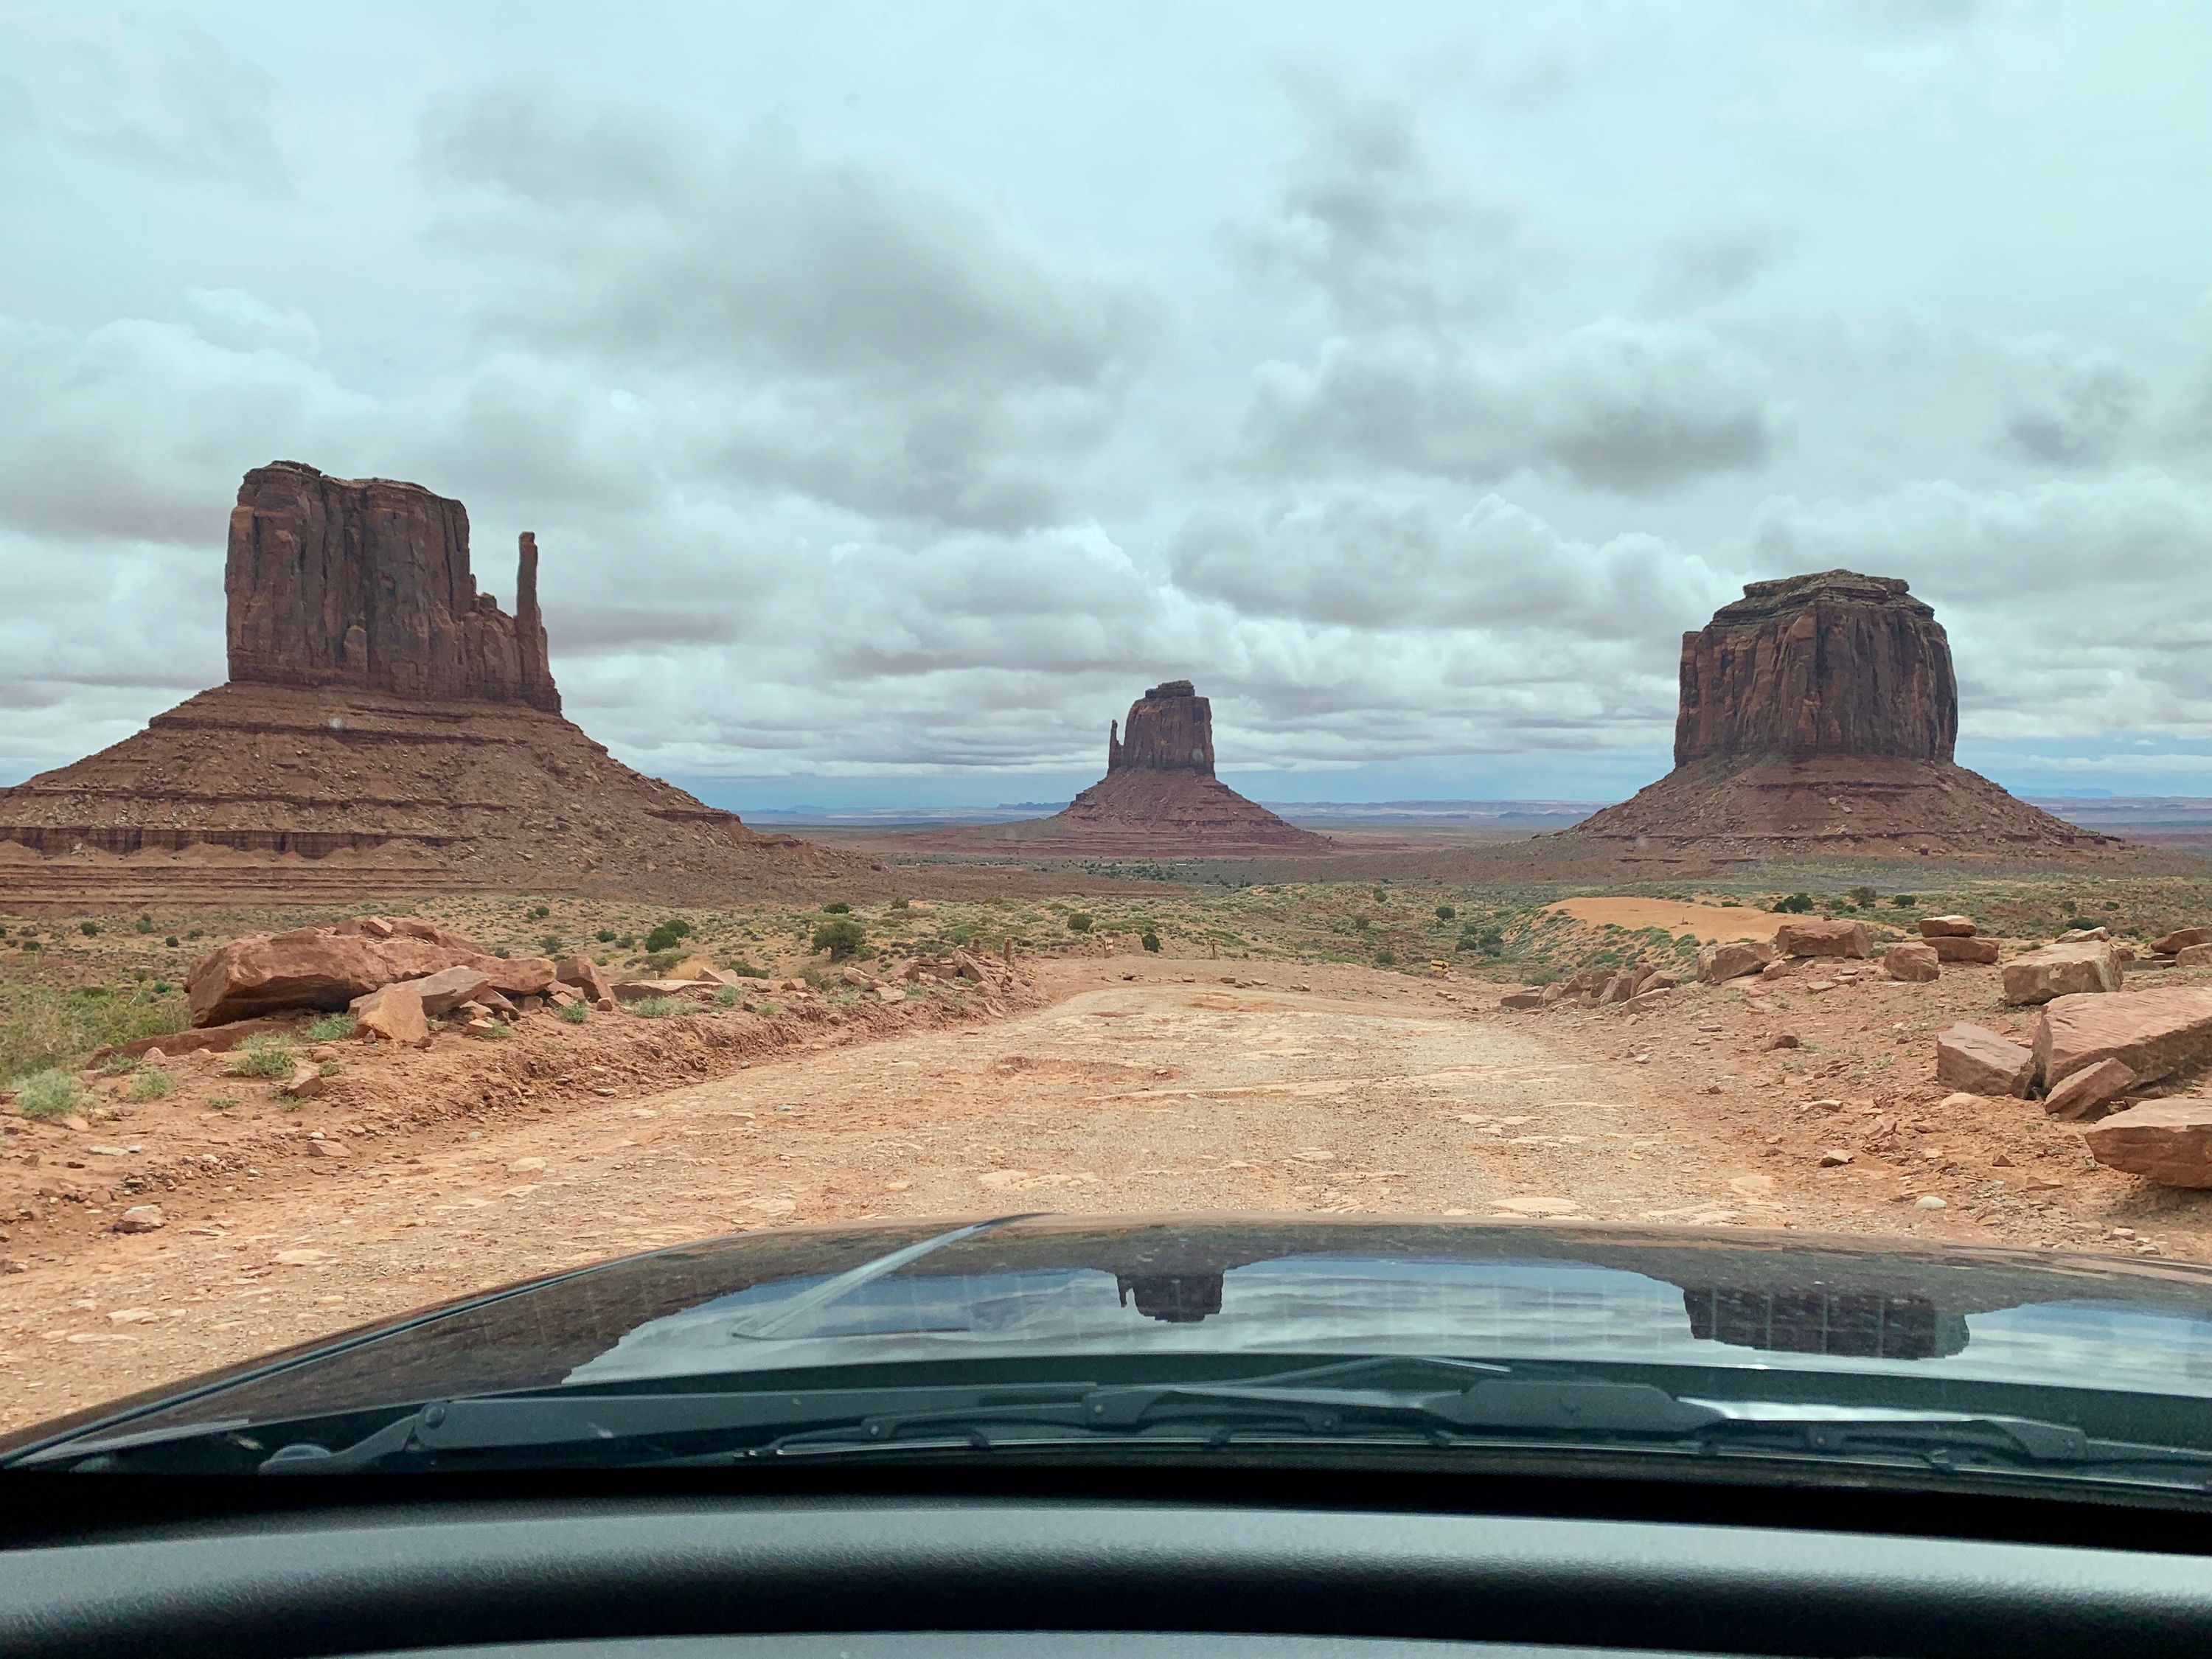 POV image while driving through Monument Valley